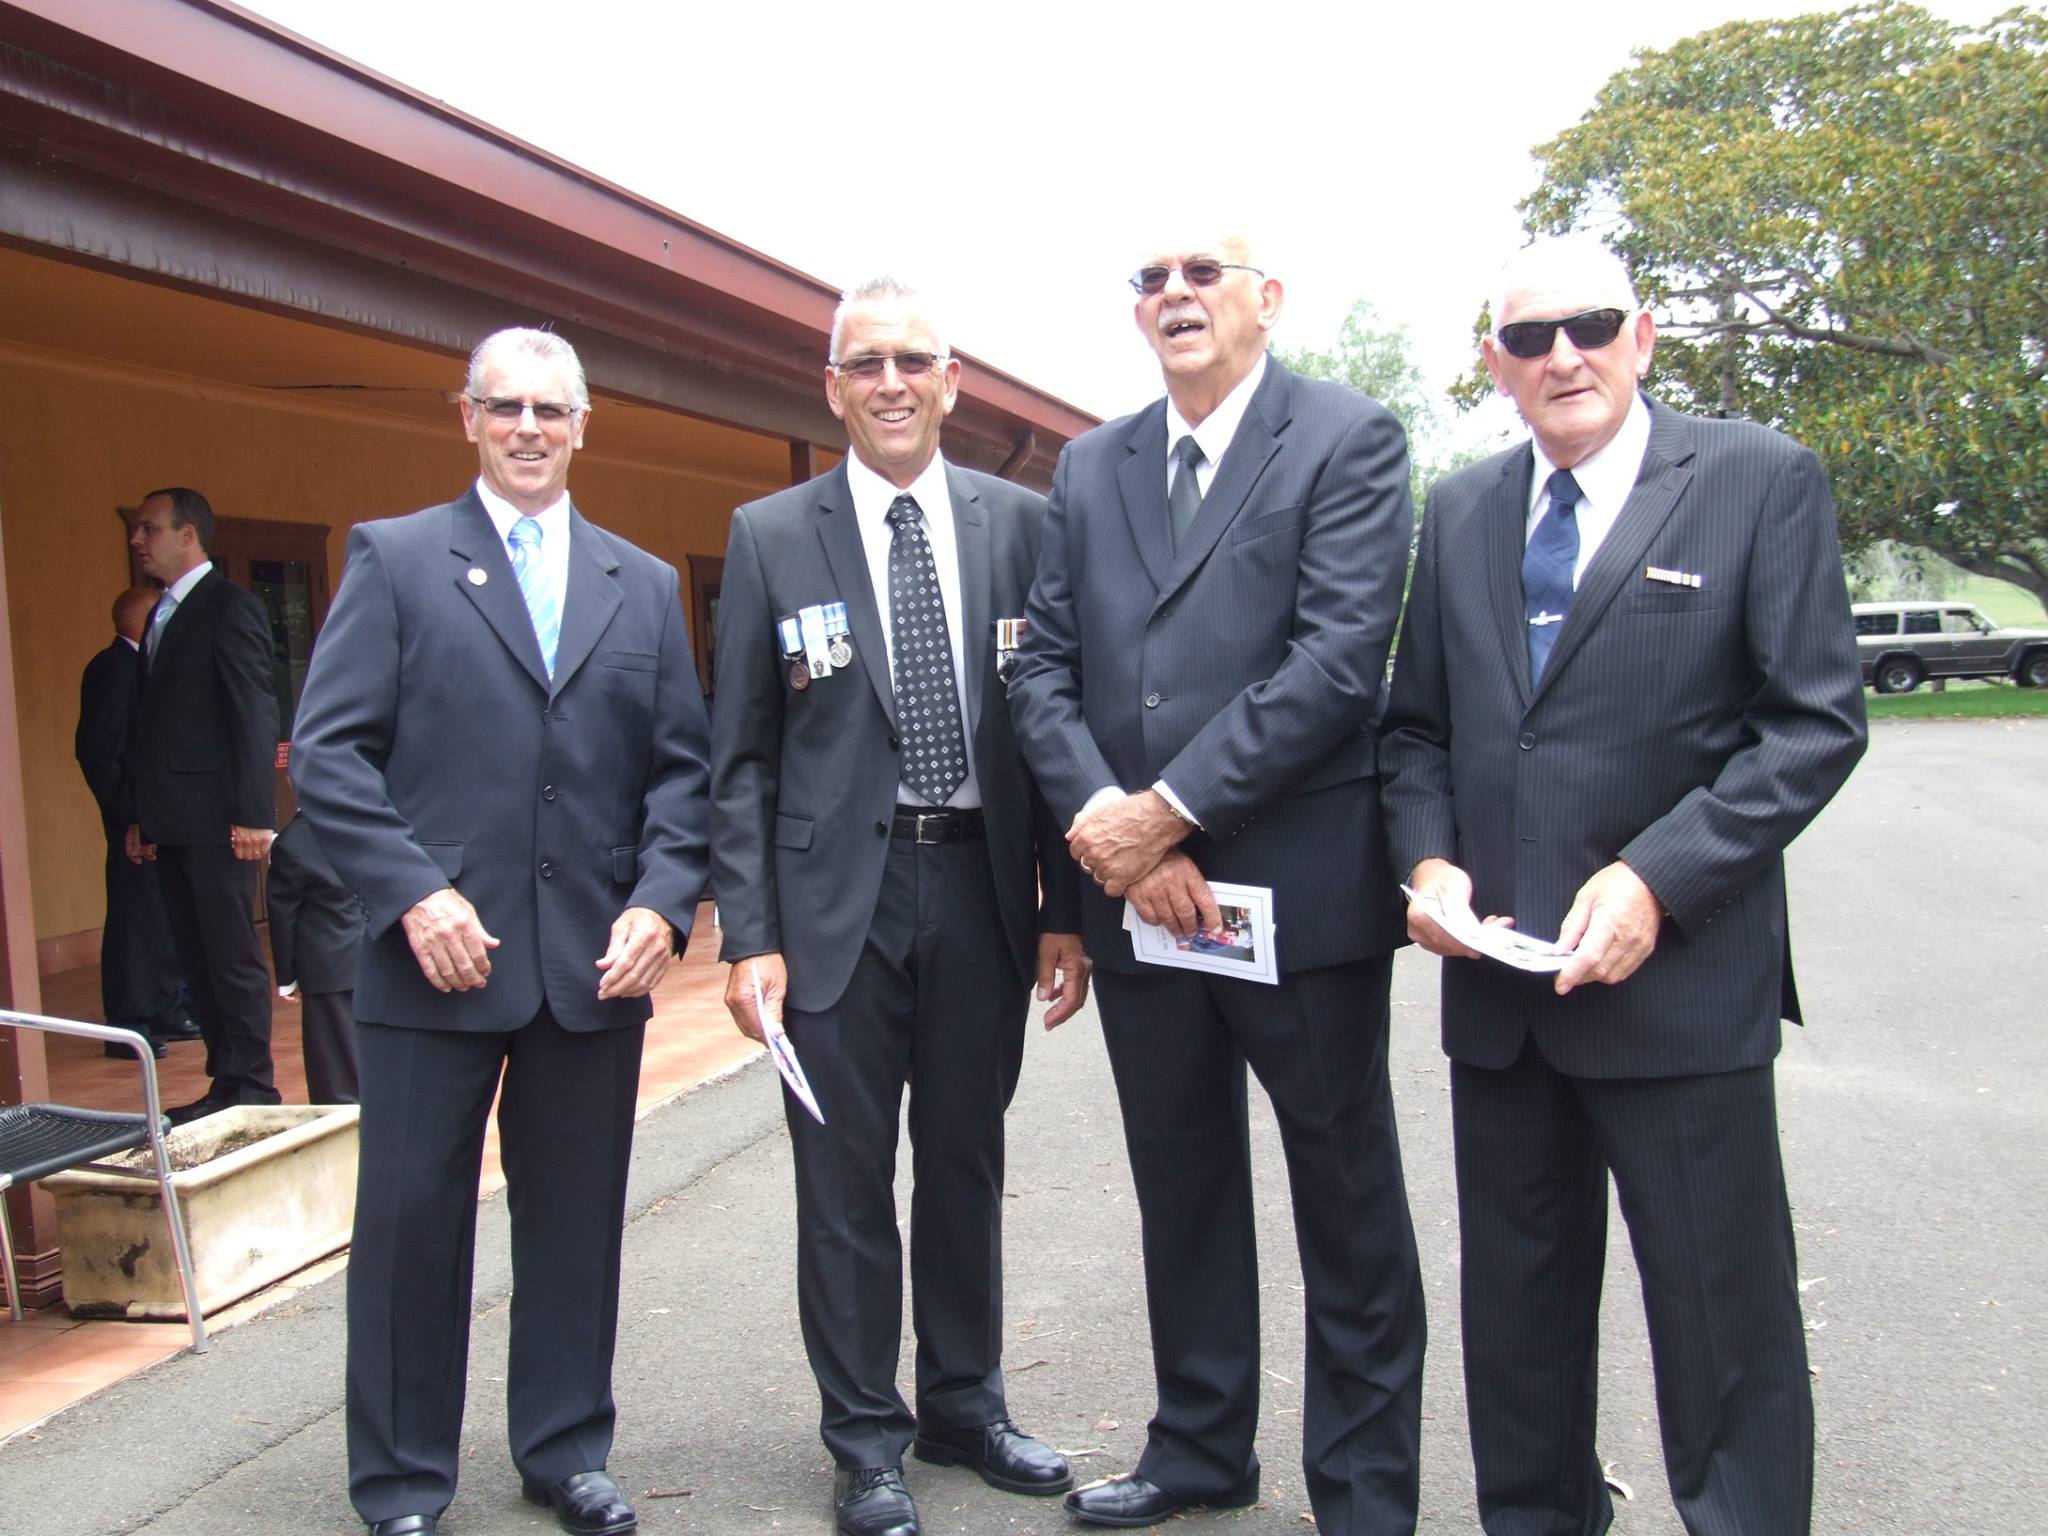 Max Sladden, Nev Greatorex, Pete Robb & Dick Cordwell await Dicks arrival at the service.